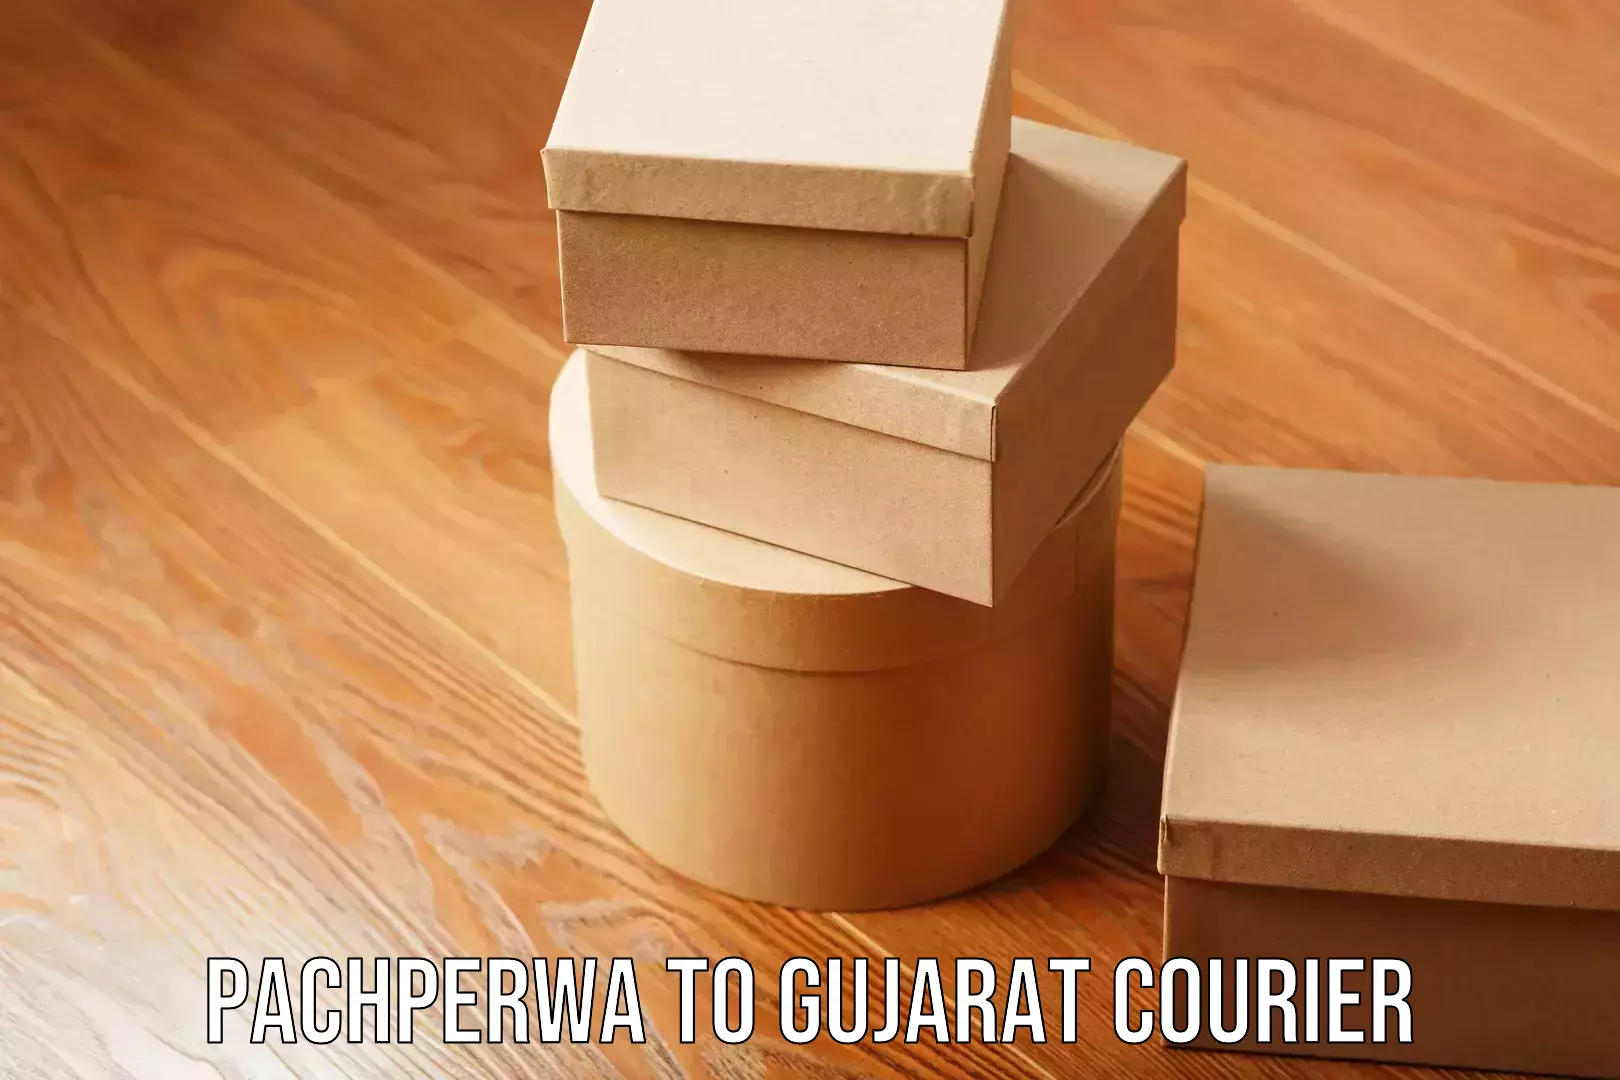 Professional movers and packers Pachperwa to Gujarat